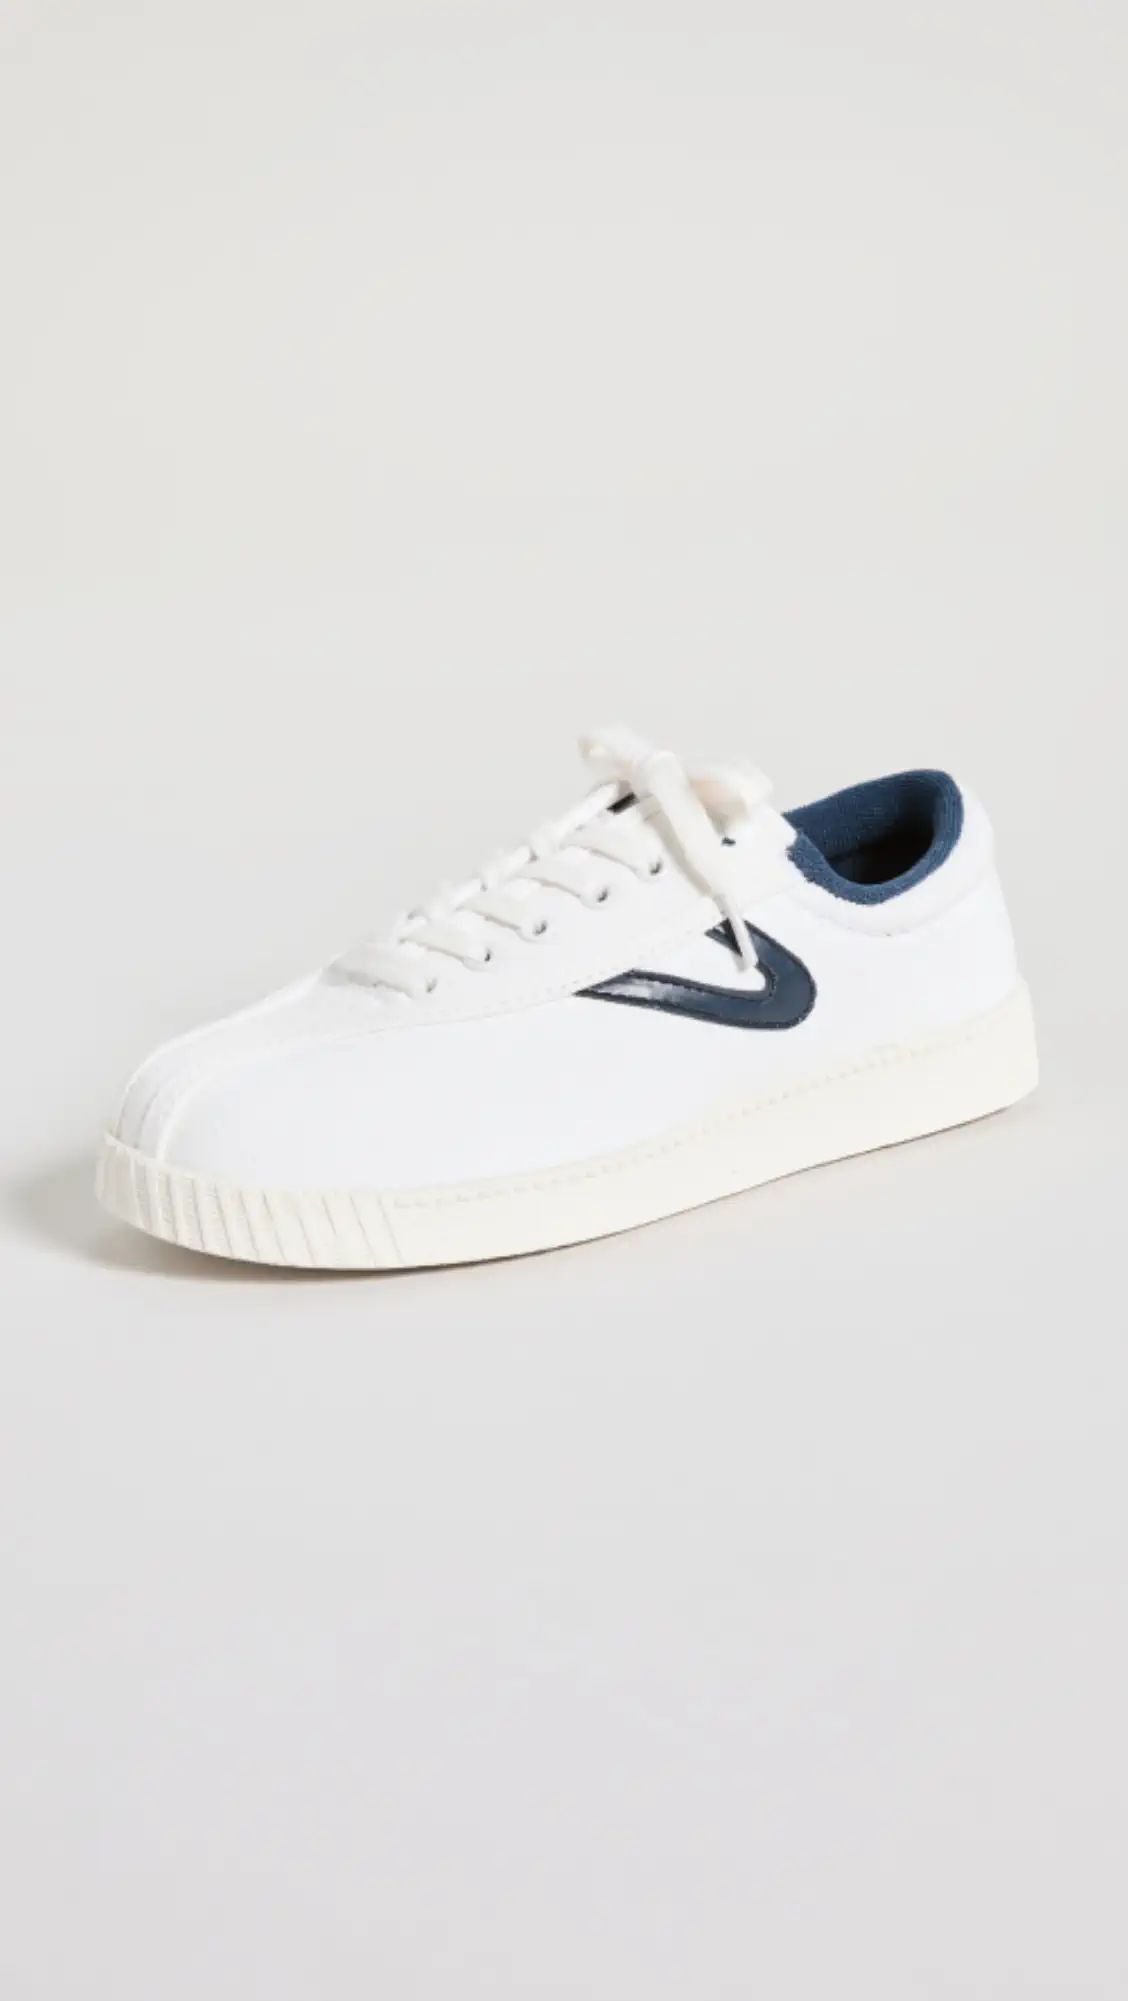 Tretorn Nylite Lace Up Sneakers | Shopbop | Shopbop